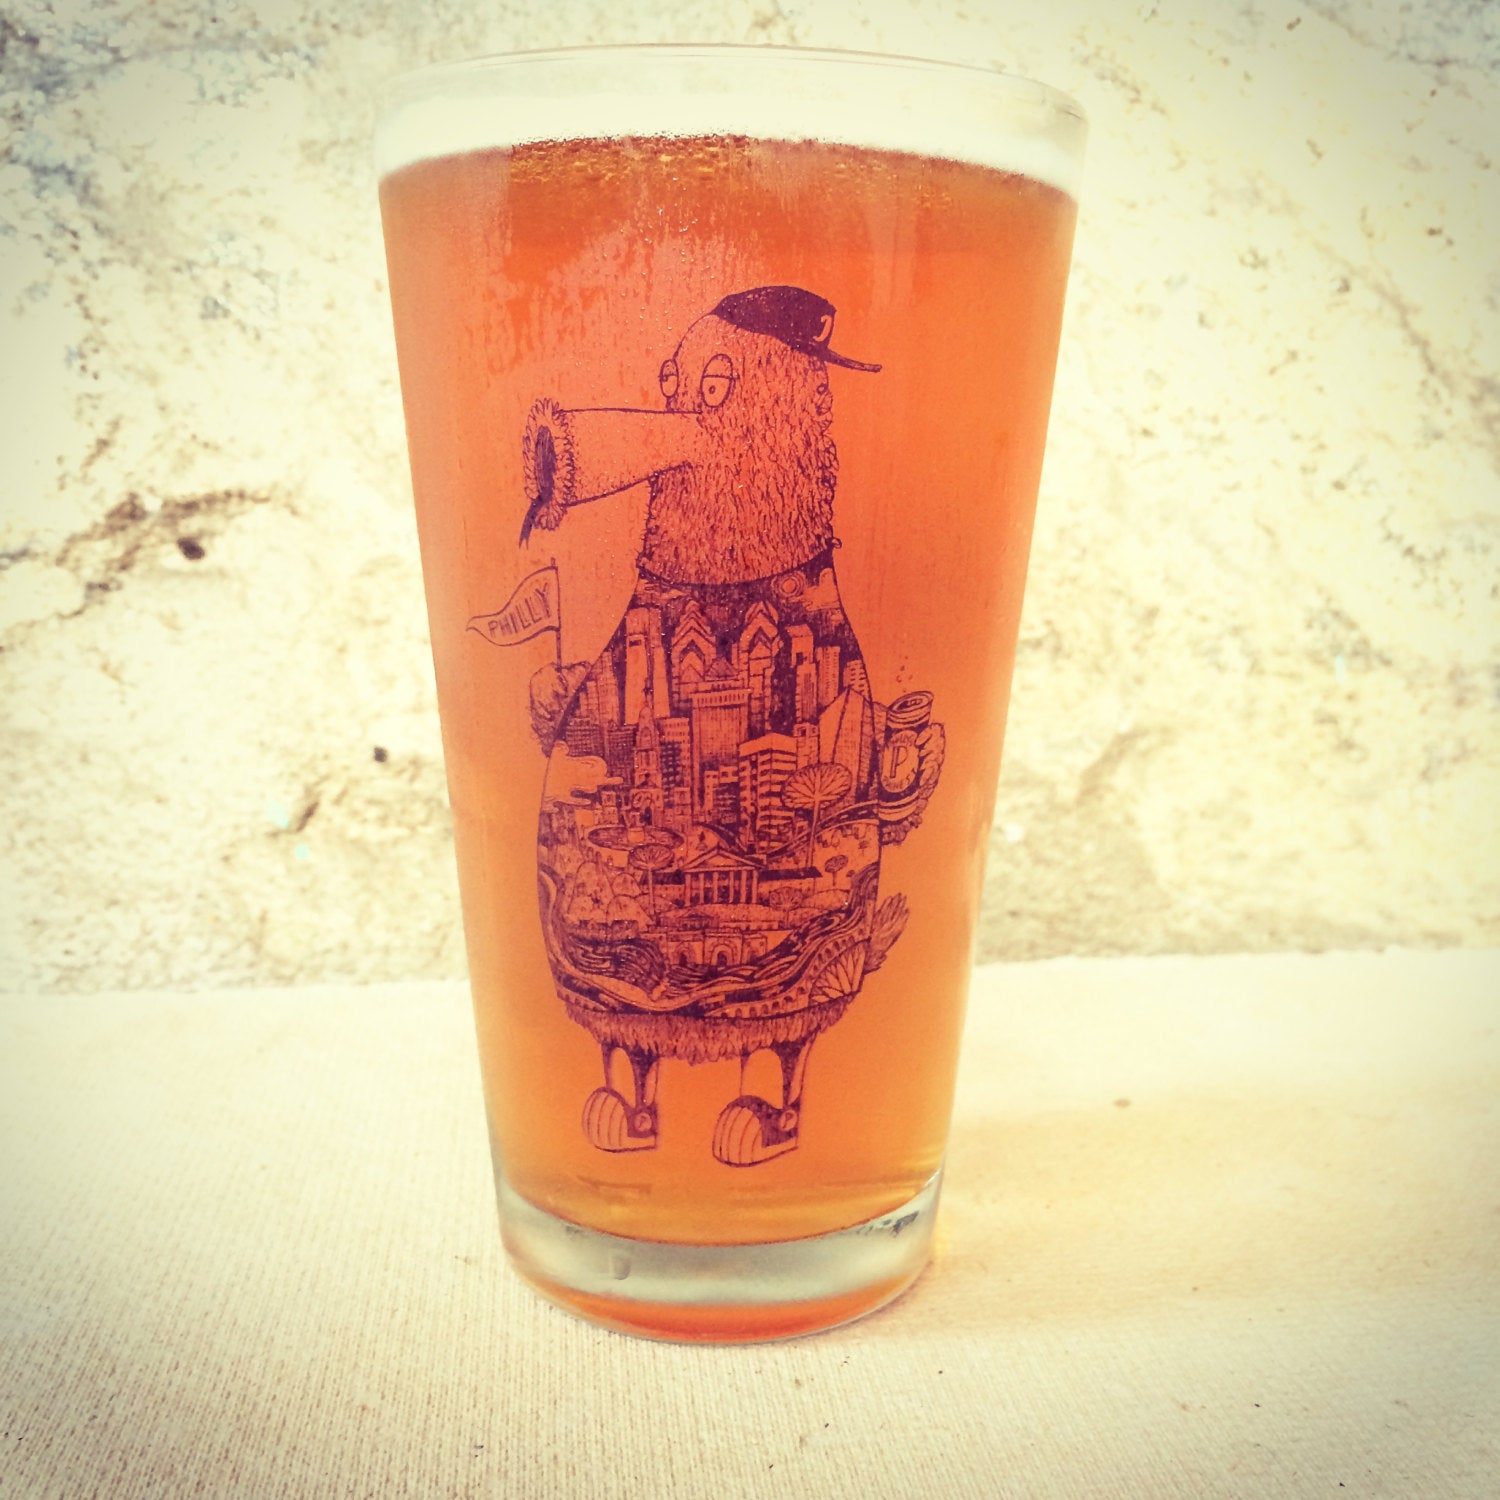 A glass of amber beer in a Philly Pint Glass with an intricate Philadelphia-themed illustration on it, set against a textured backdrop by Paul Carpenter.